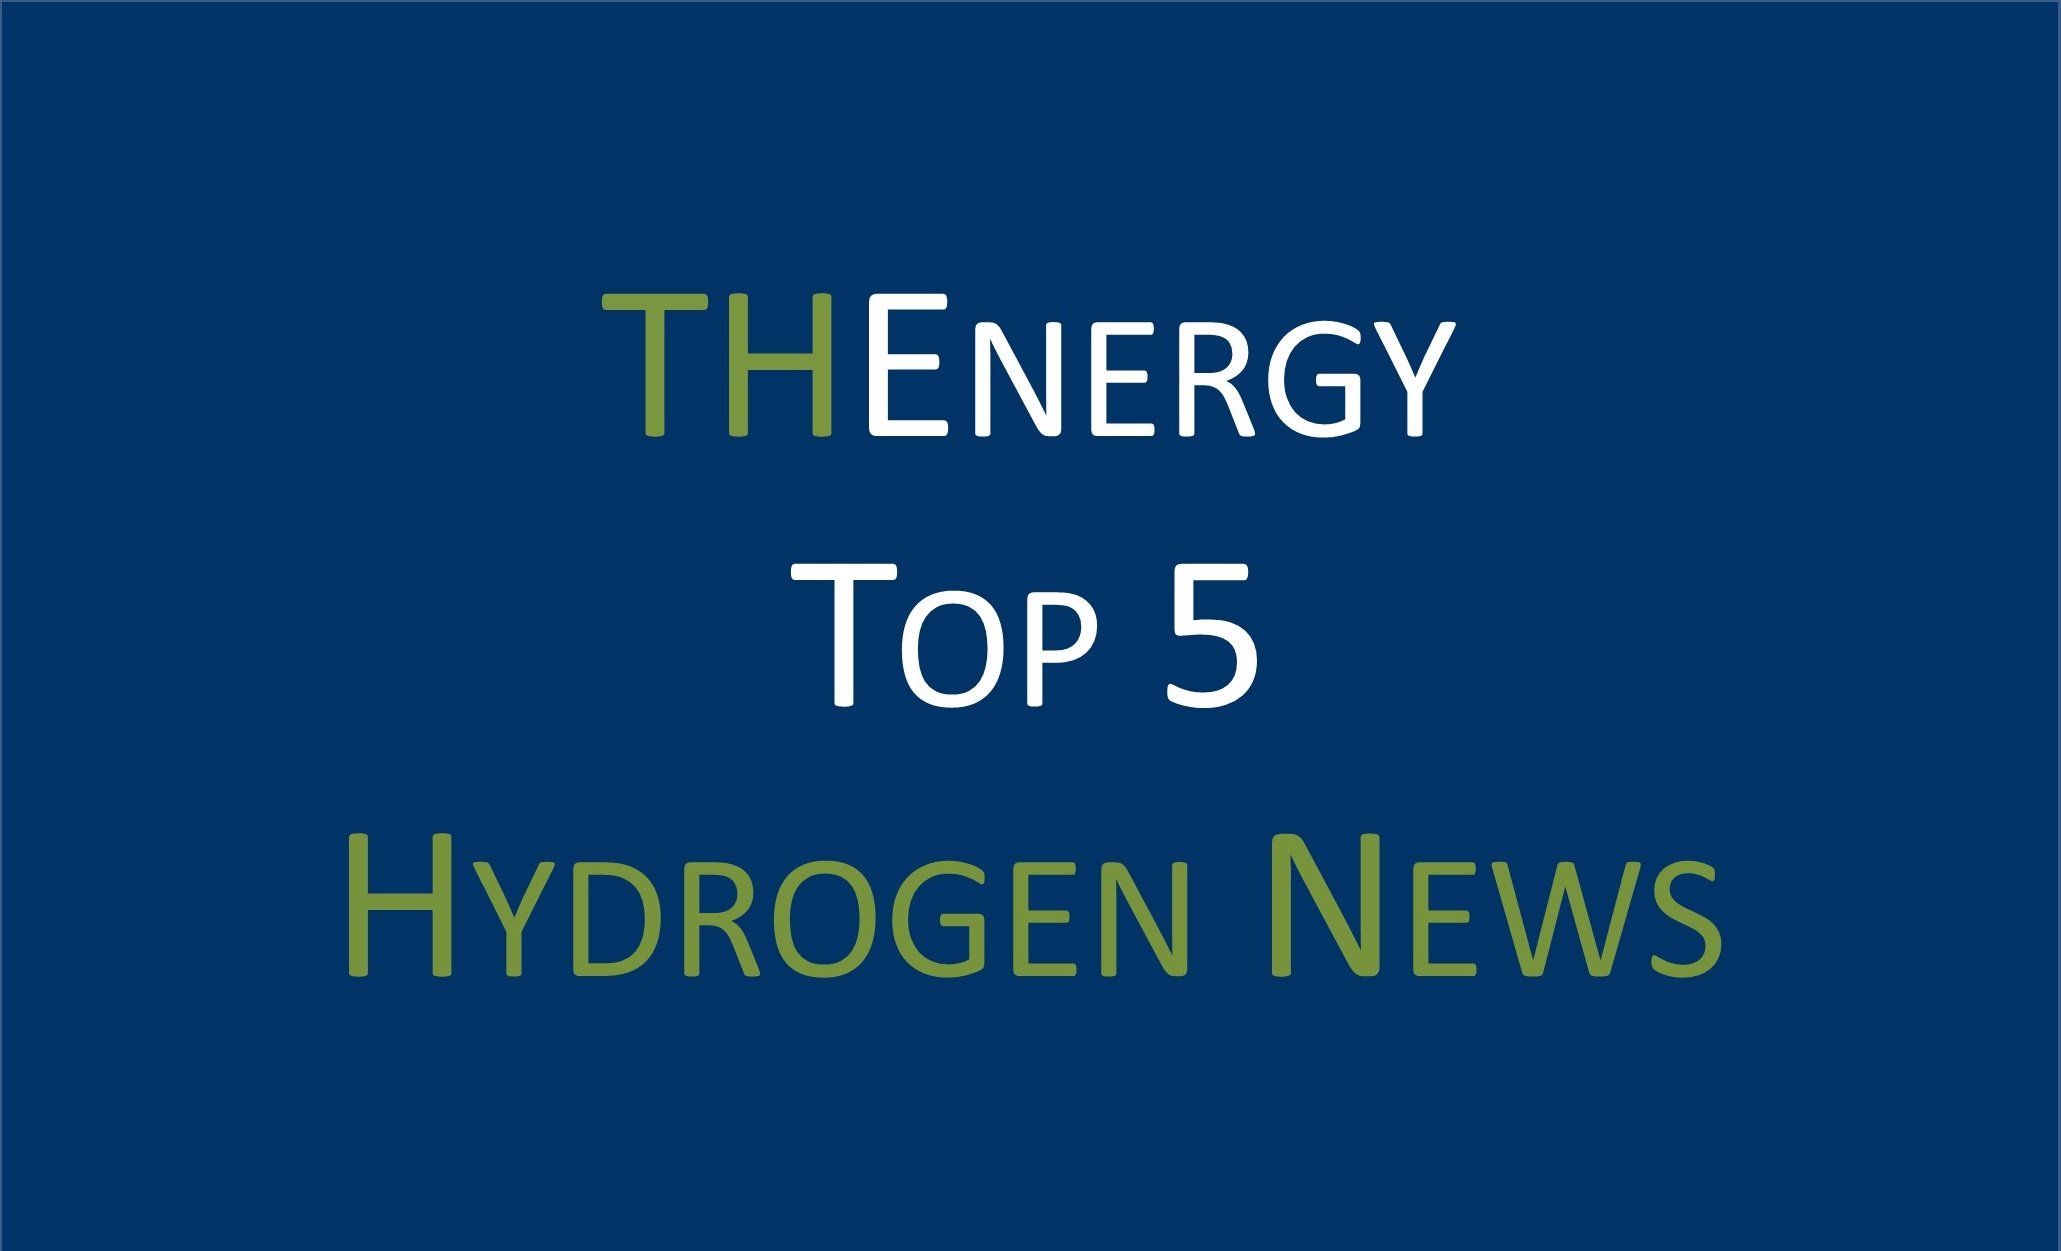 Top hydrogen news from July 2020